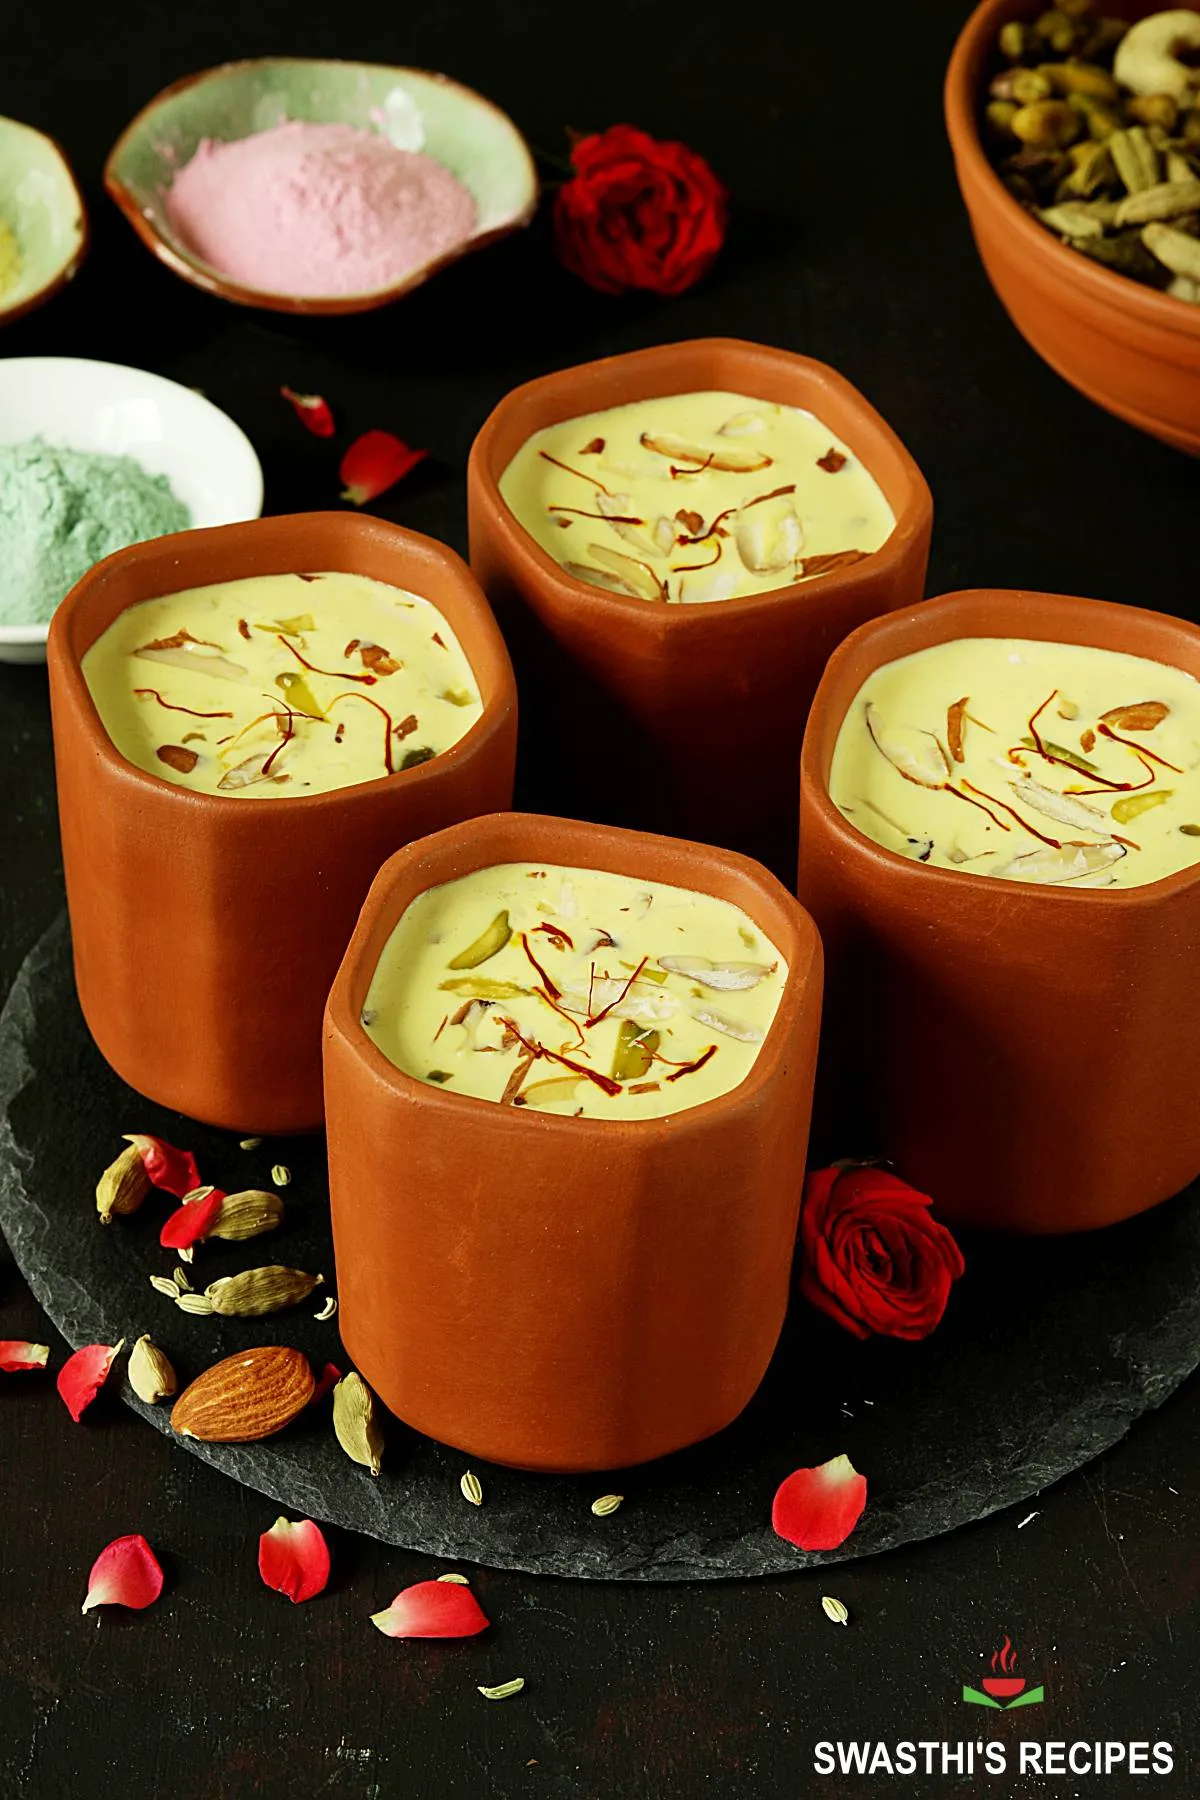 Thandai served in clay cups